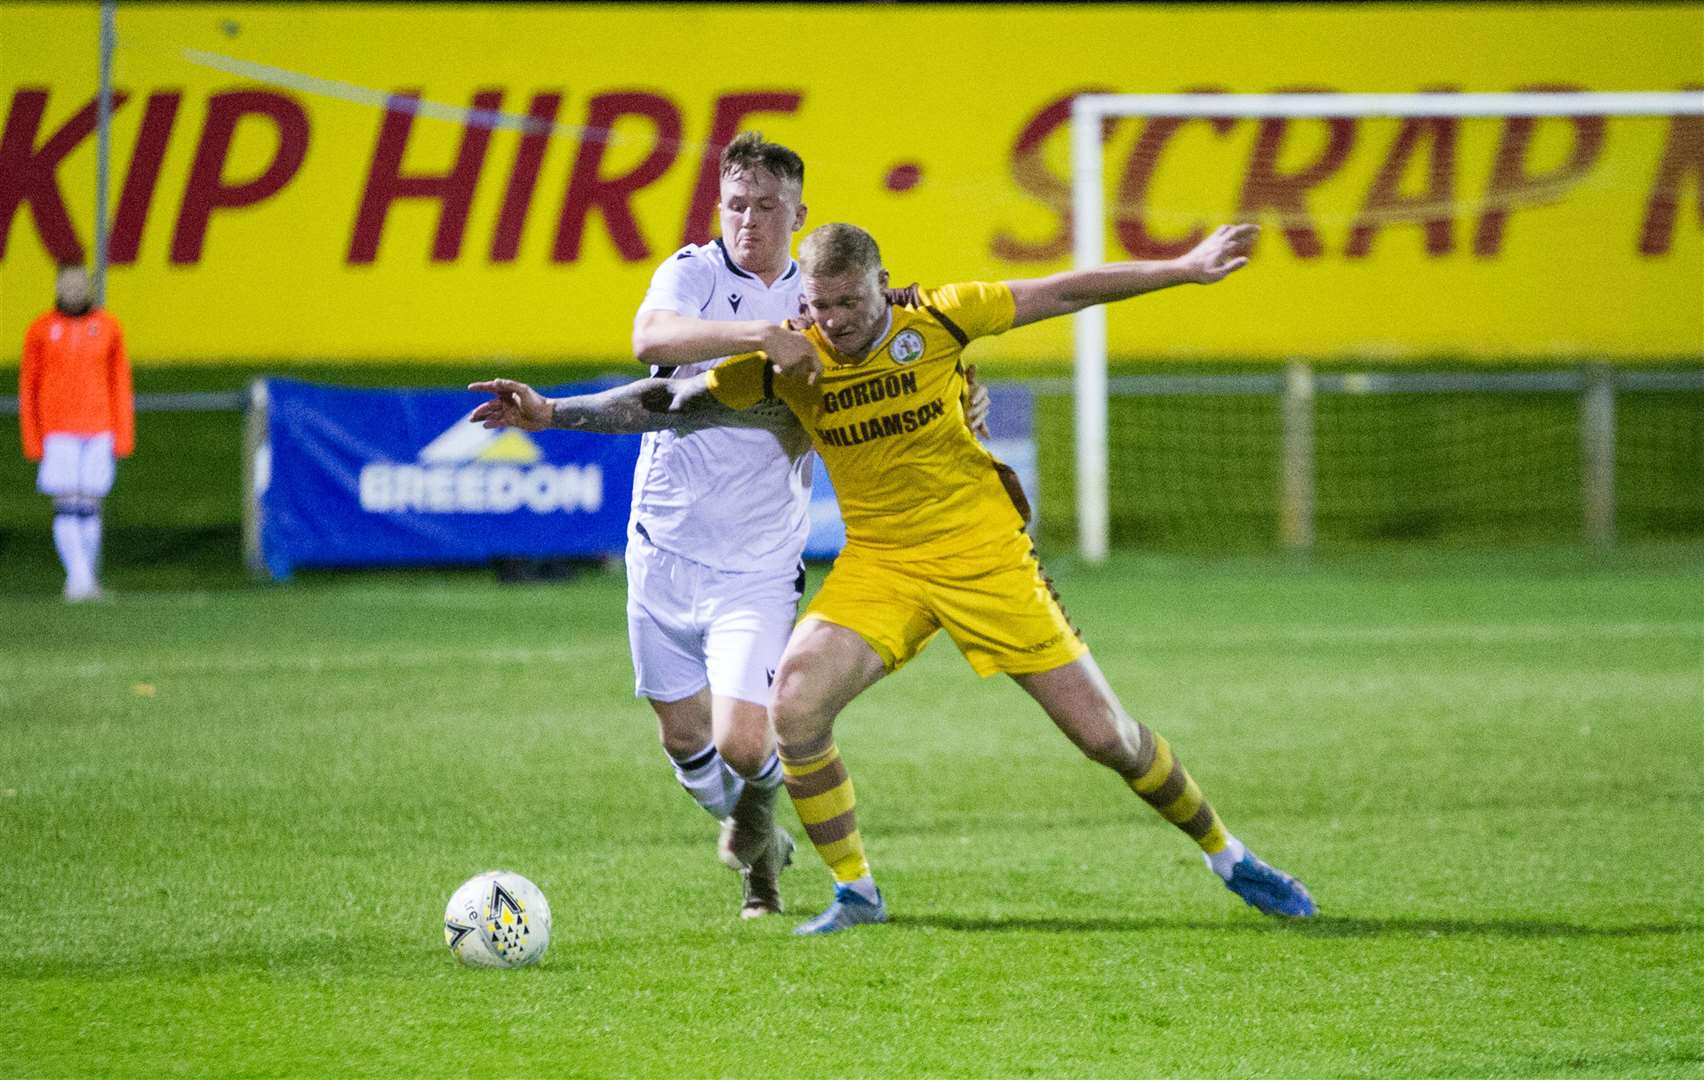 Lee Fraser ended a run of more than 700 minutes without a goal from Forres. Picture: Becky Saunderson